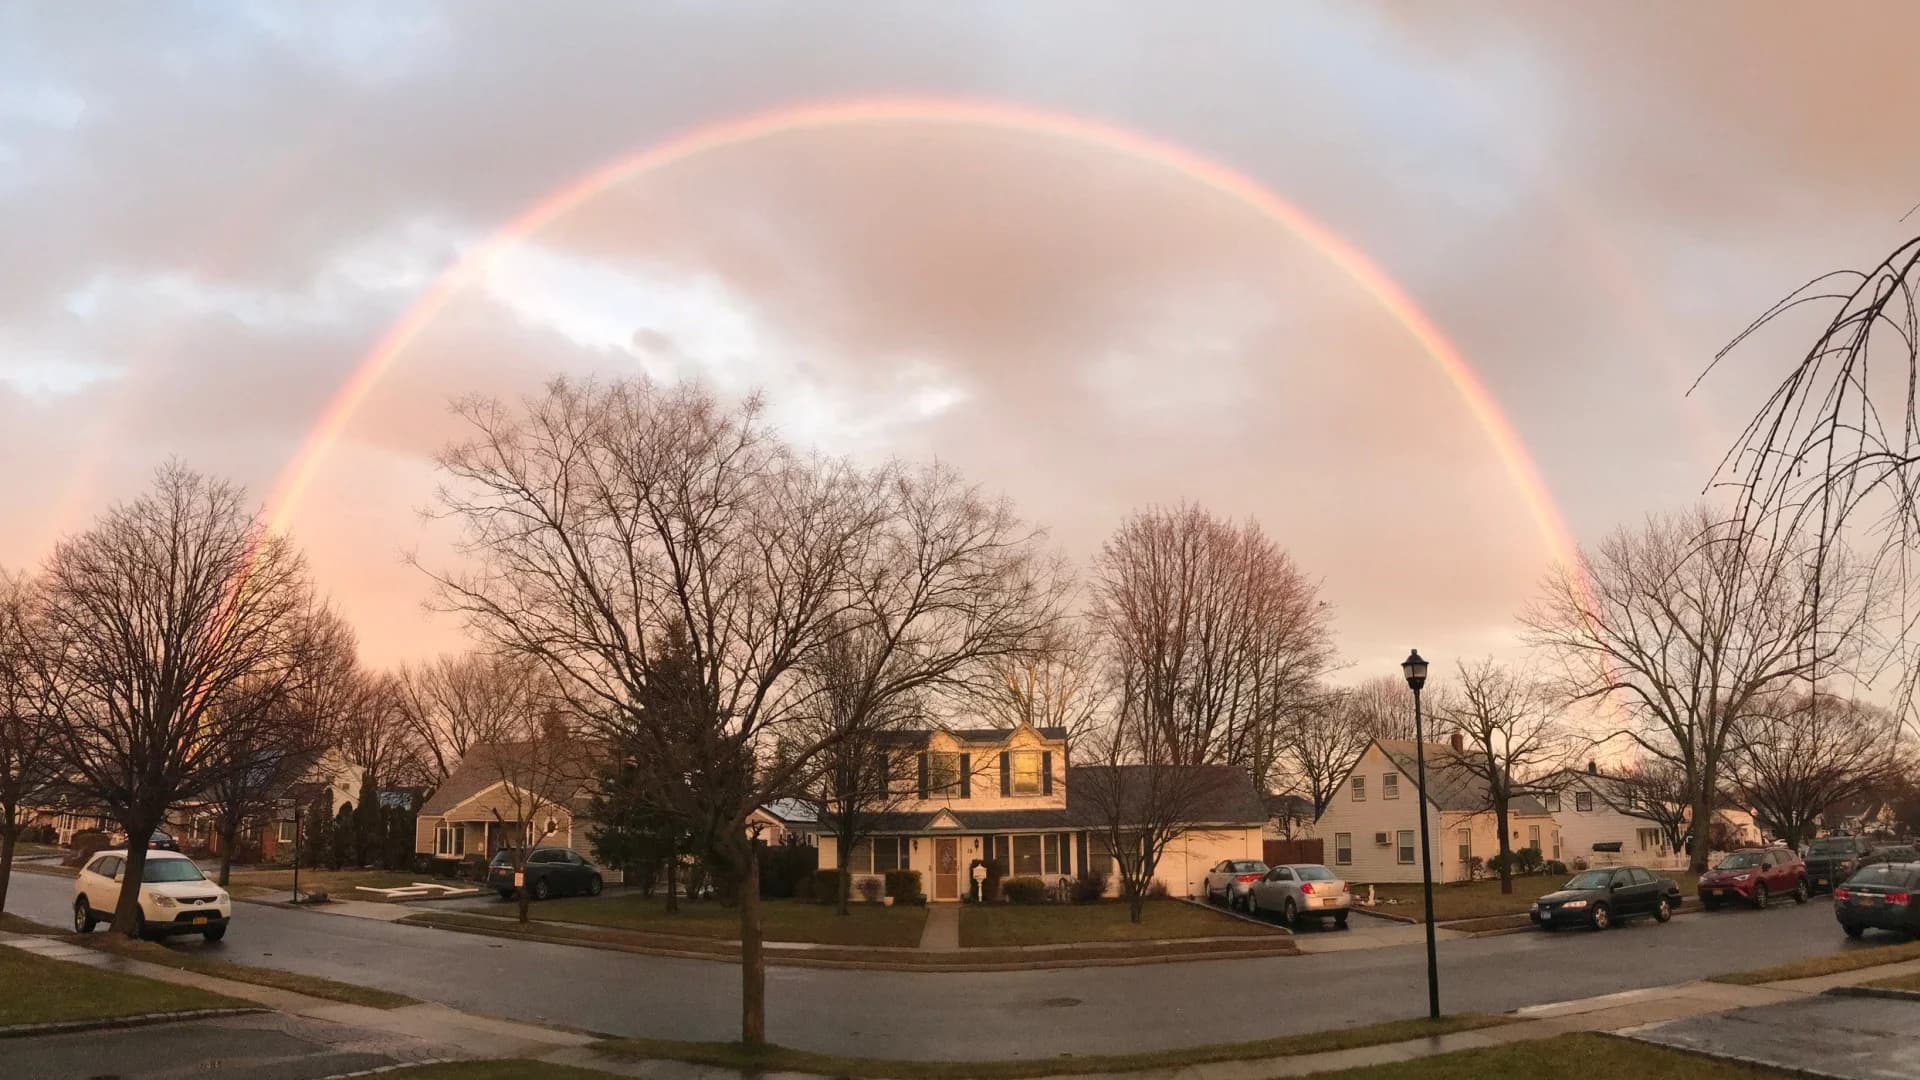 Calm after the storm - Rainbows on Jan. 24